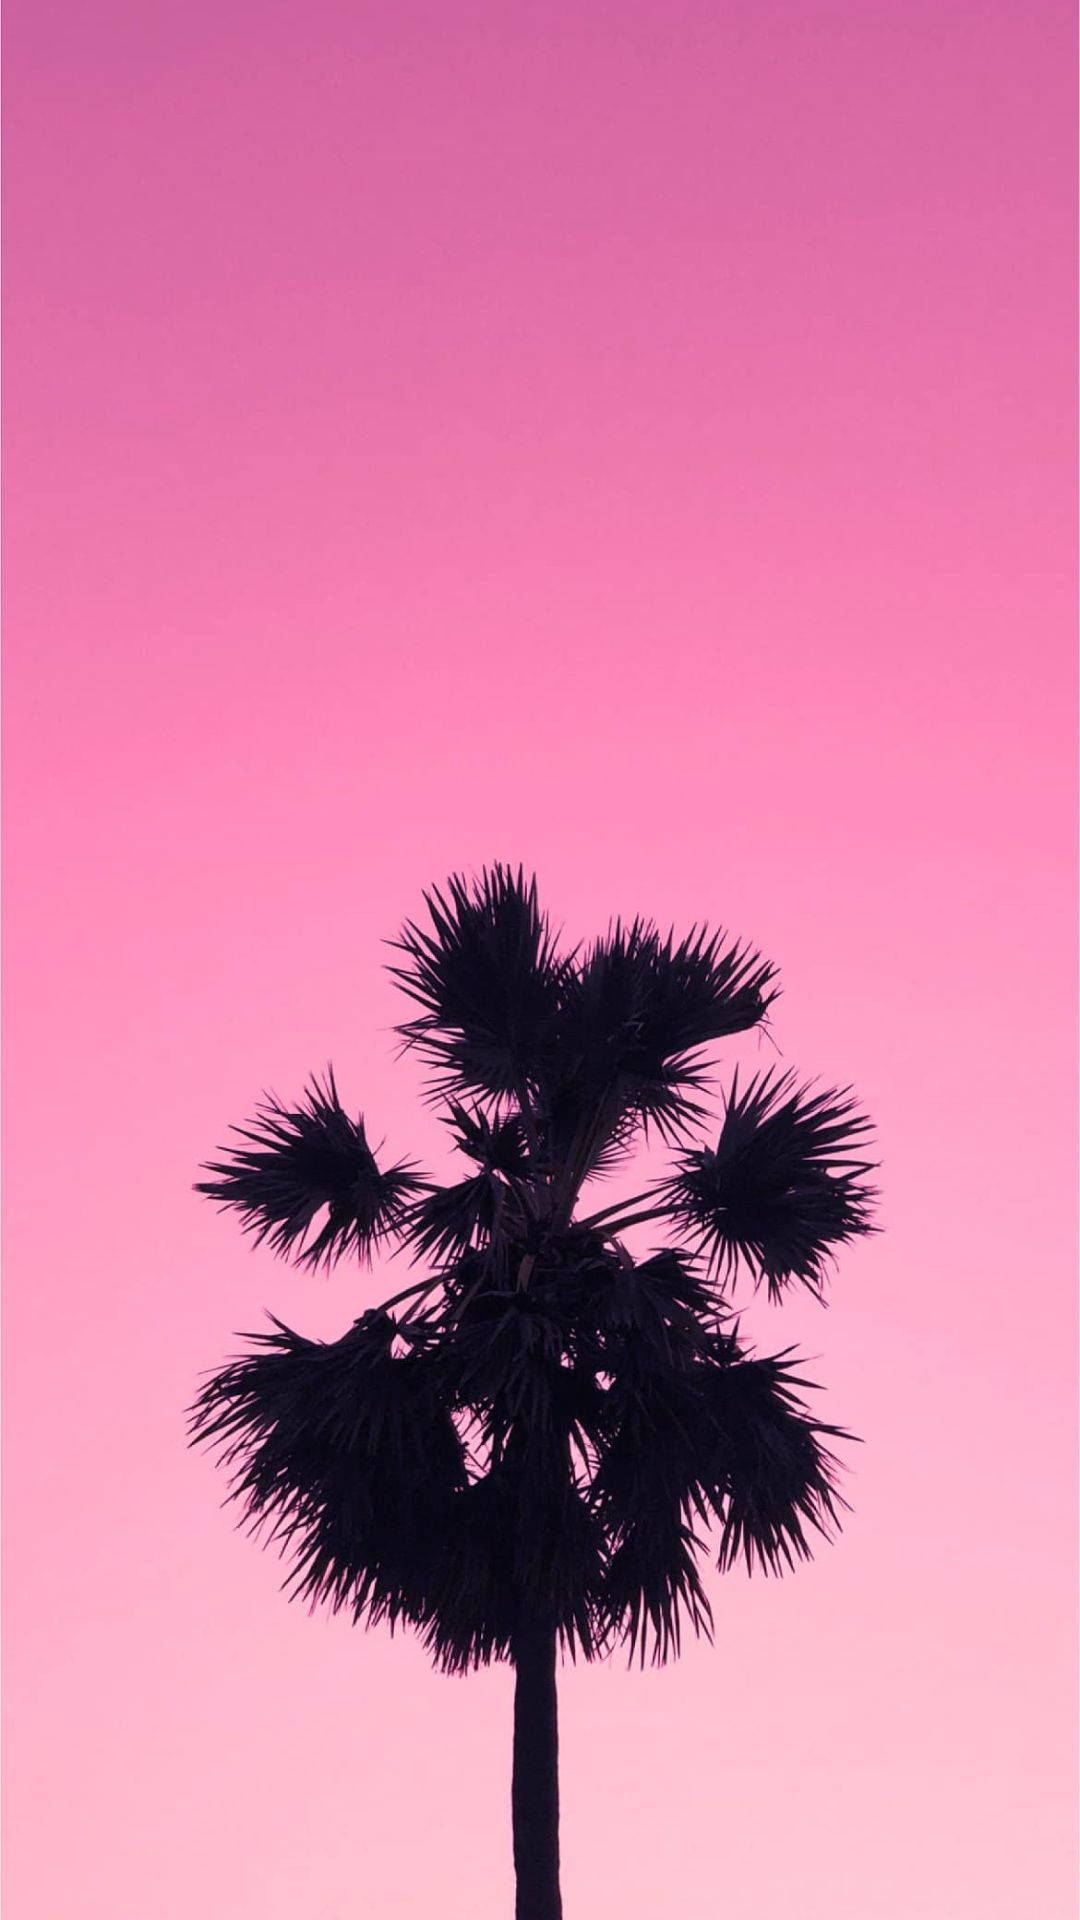 Palm Tree On Aesthetic Pink Sky Picture